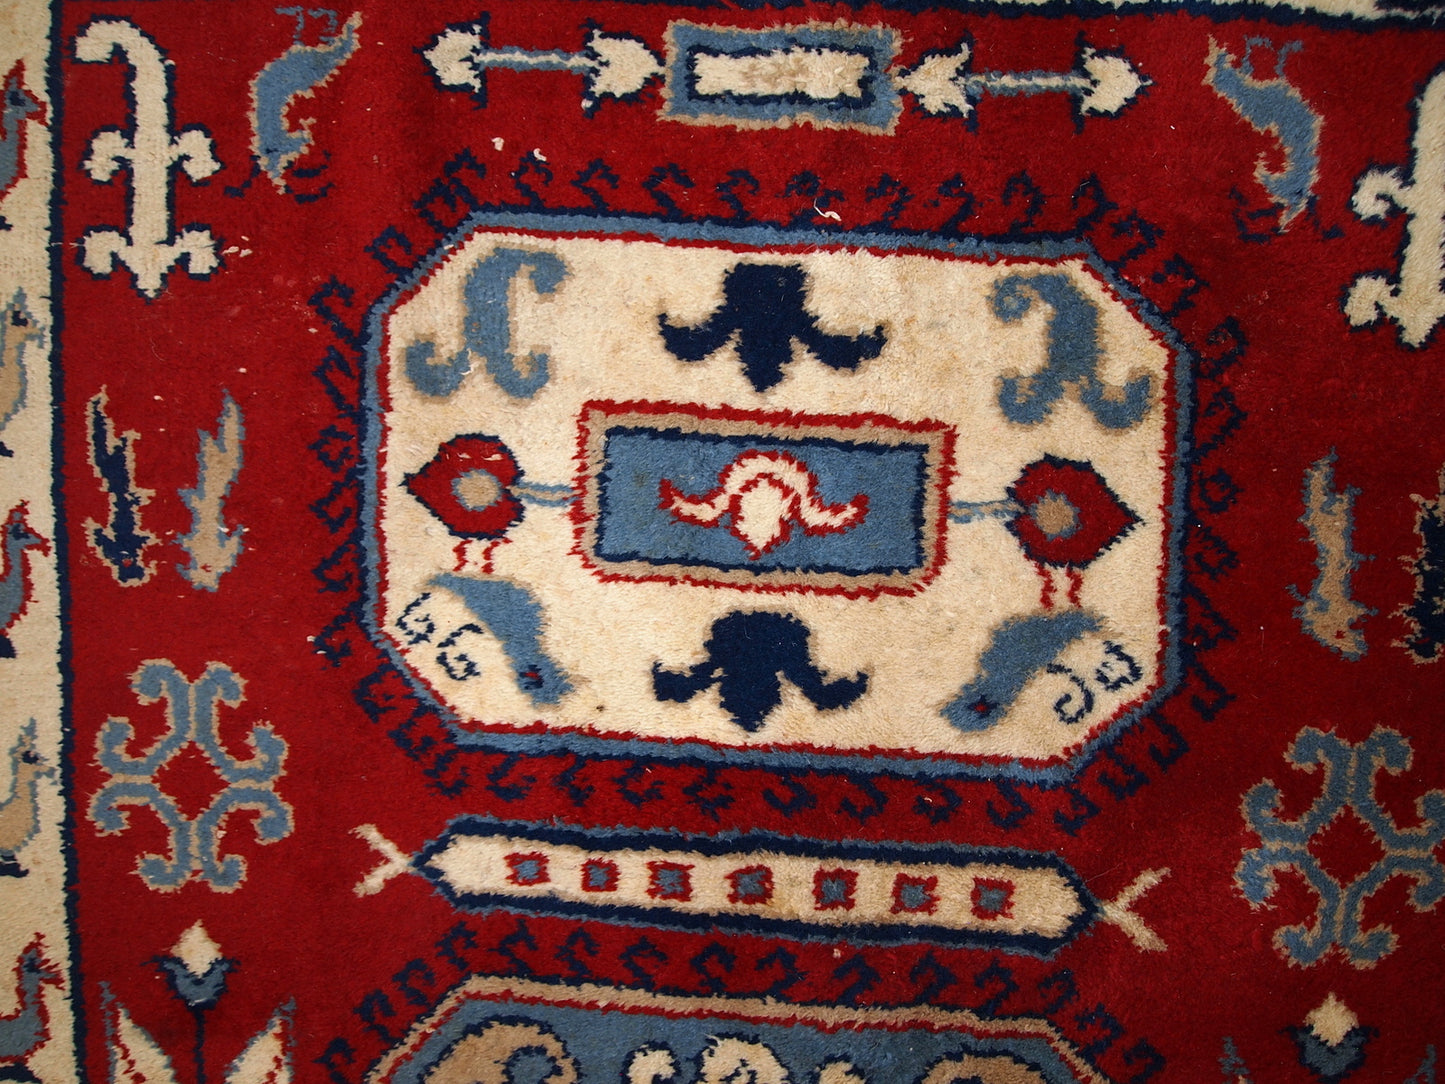 Handmade Russian vintage rug in deep red shade. The beige border decorated in roosters. Made out of wool, the rug is very thick and warm. It is in original good condition.